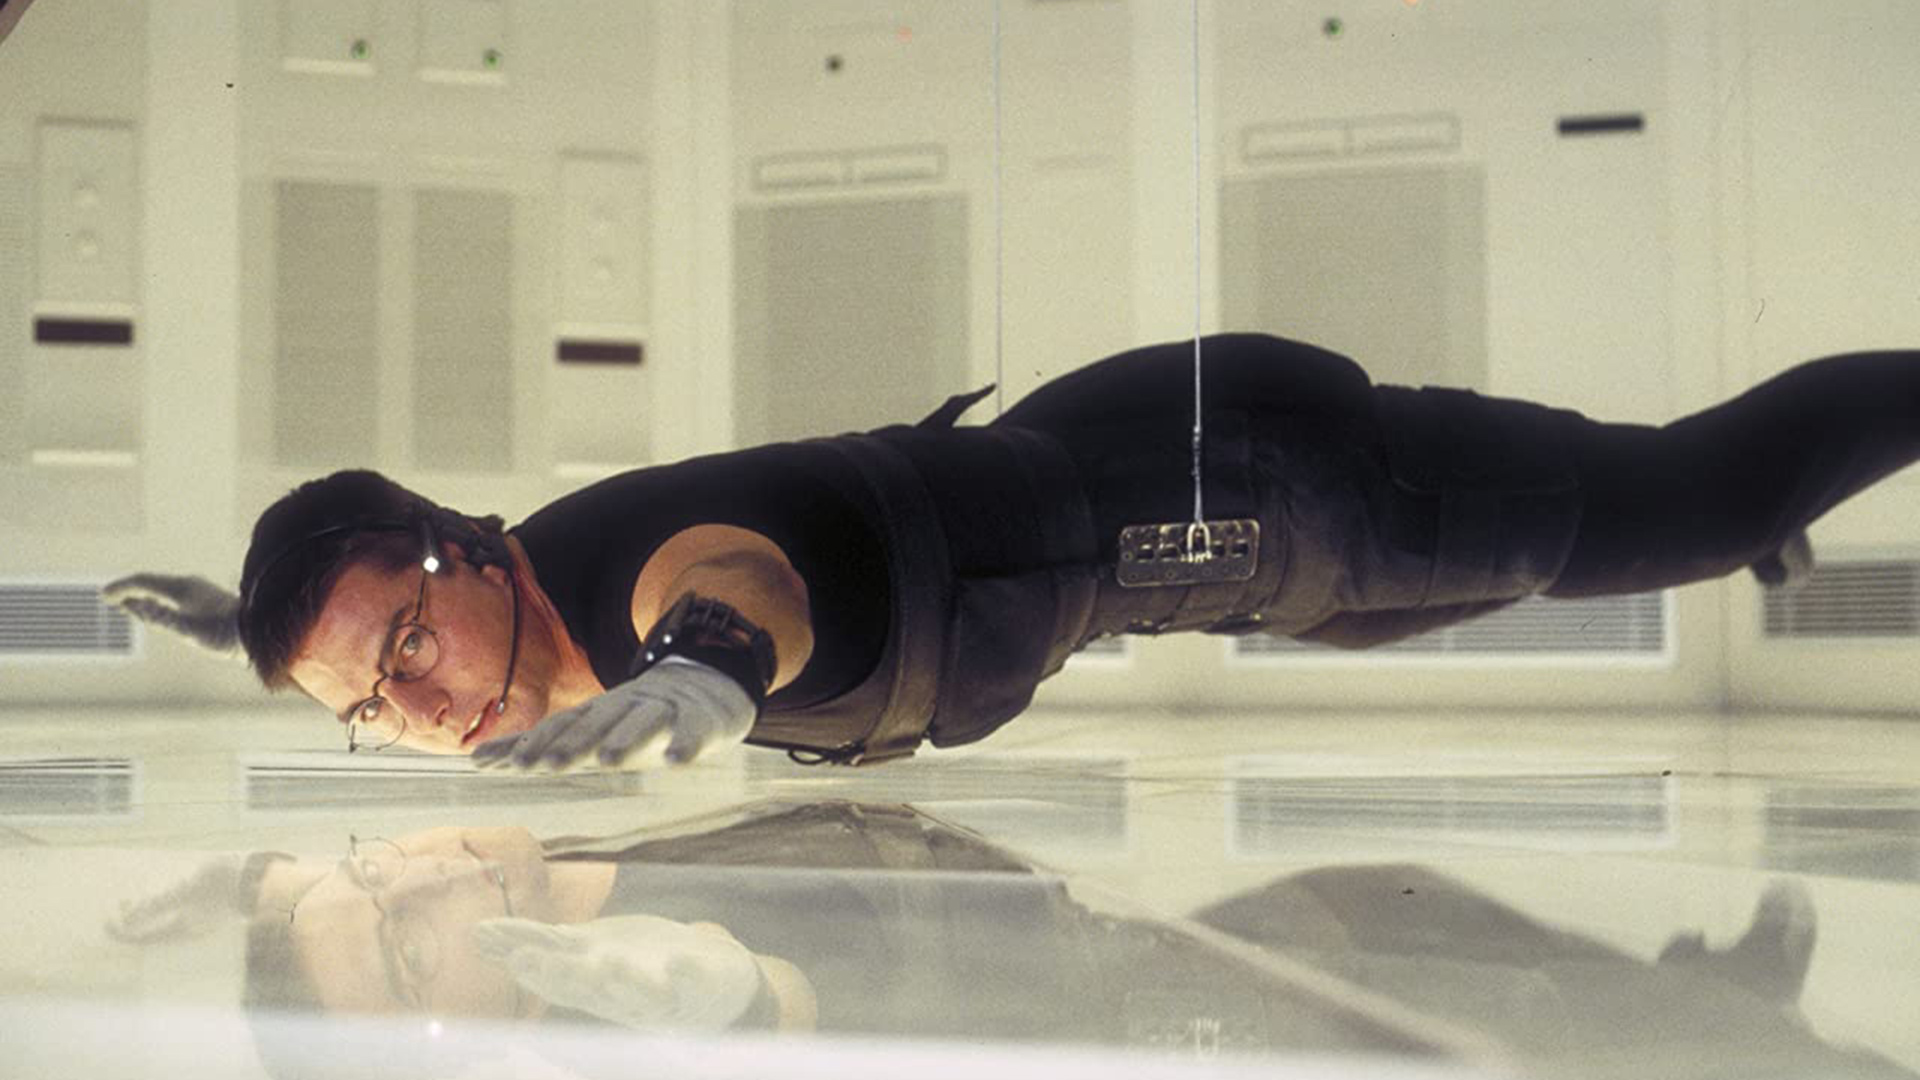 Tom Cruise as Ethan Hunt in an iconic scene from Mission: Impossible. Image: IMDB.